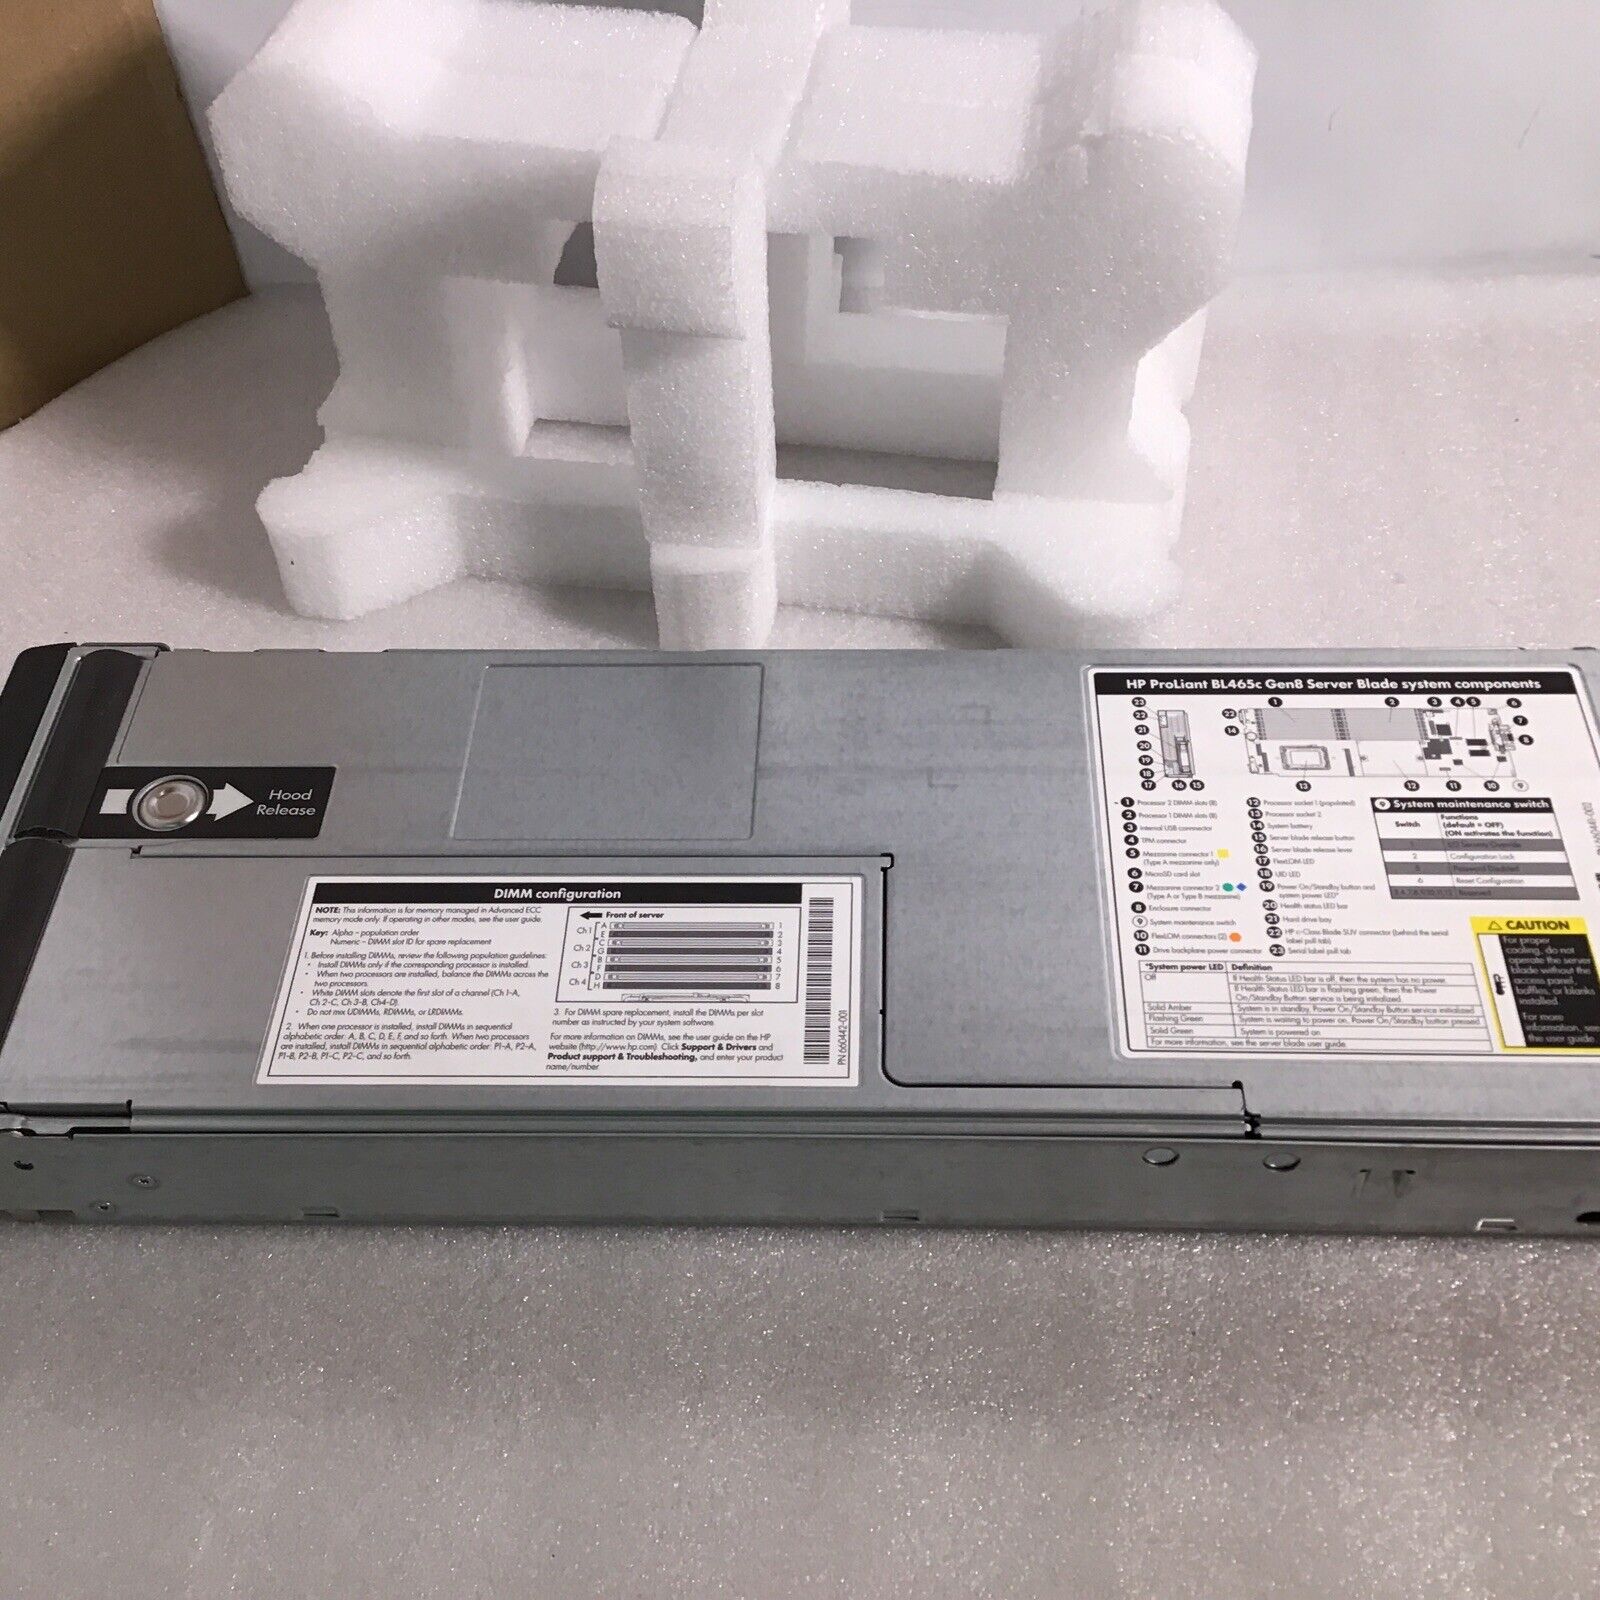 HP Proliant BL465c Gen8 Server Blade System Components /AS-IS Untested